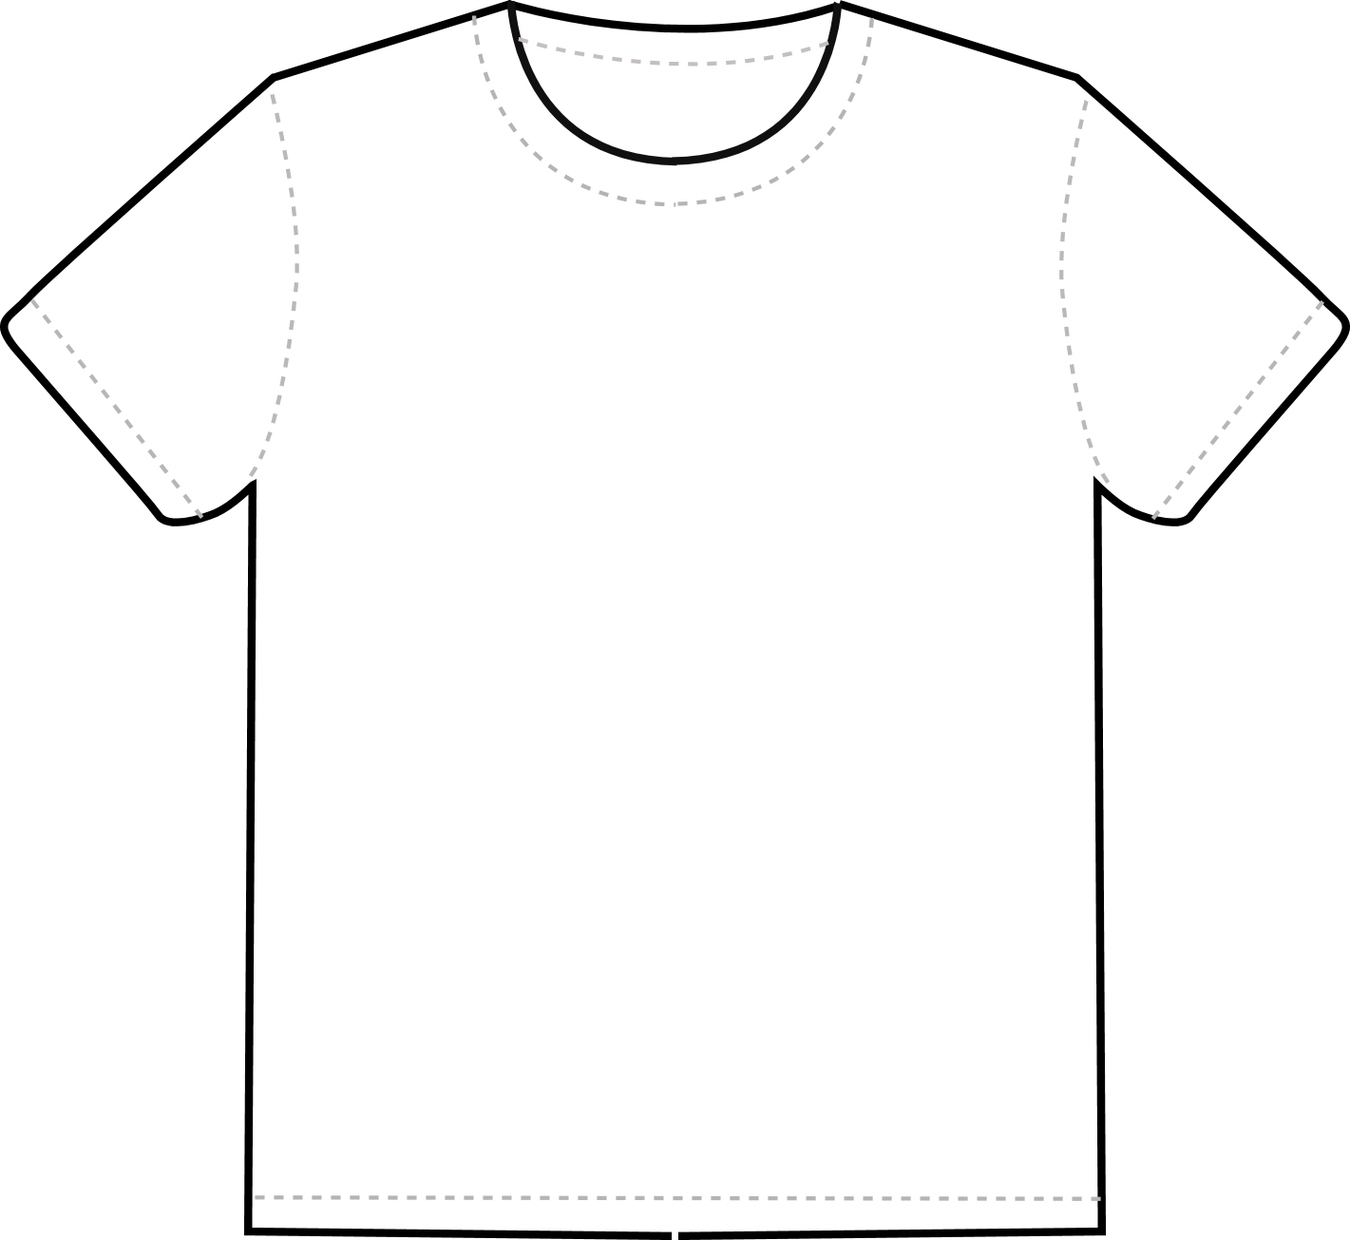 Shirt Out Line - ClipArt Best Intended For Blank T Shirt Outline Template